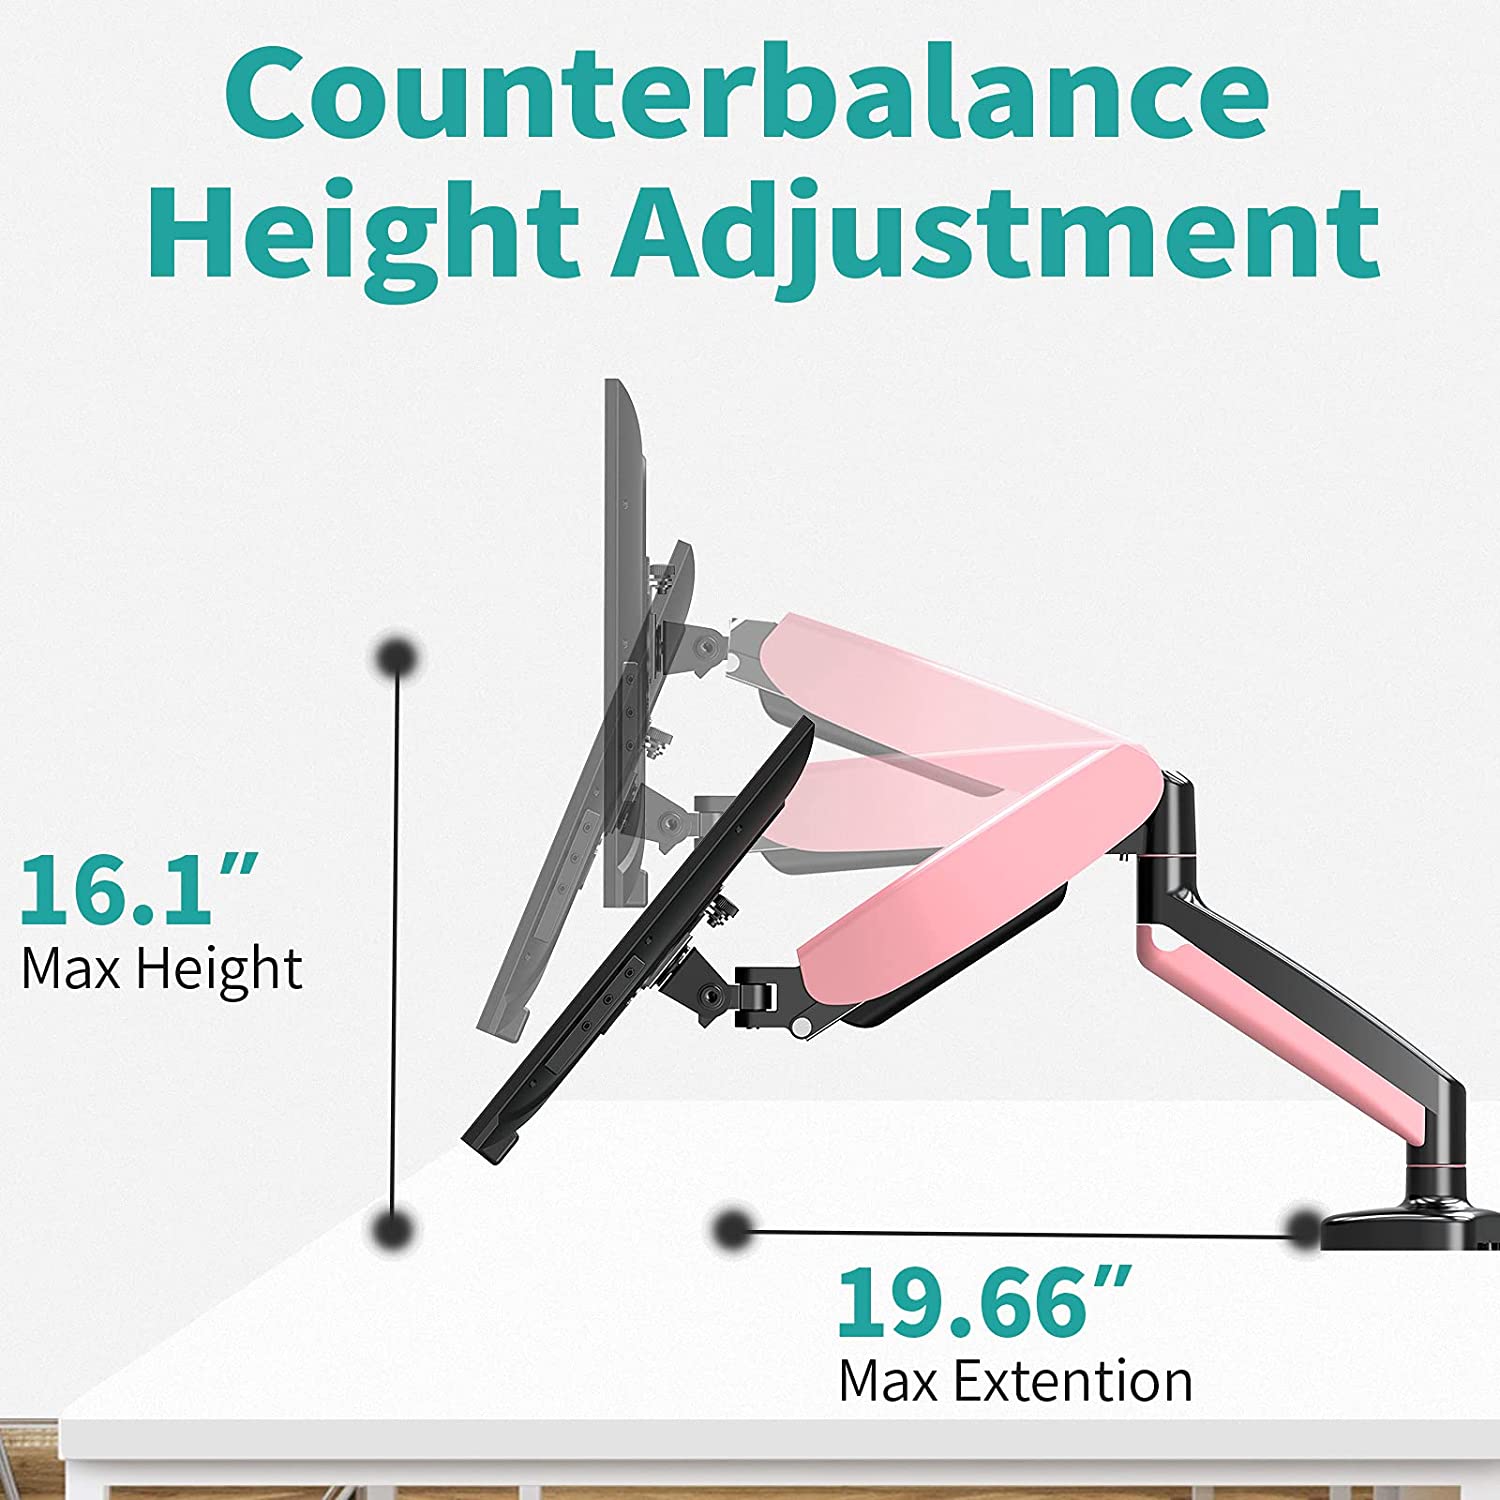 Single Arm pink height adjustable monitor holder with max 16.1'' height adjustment